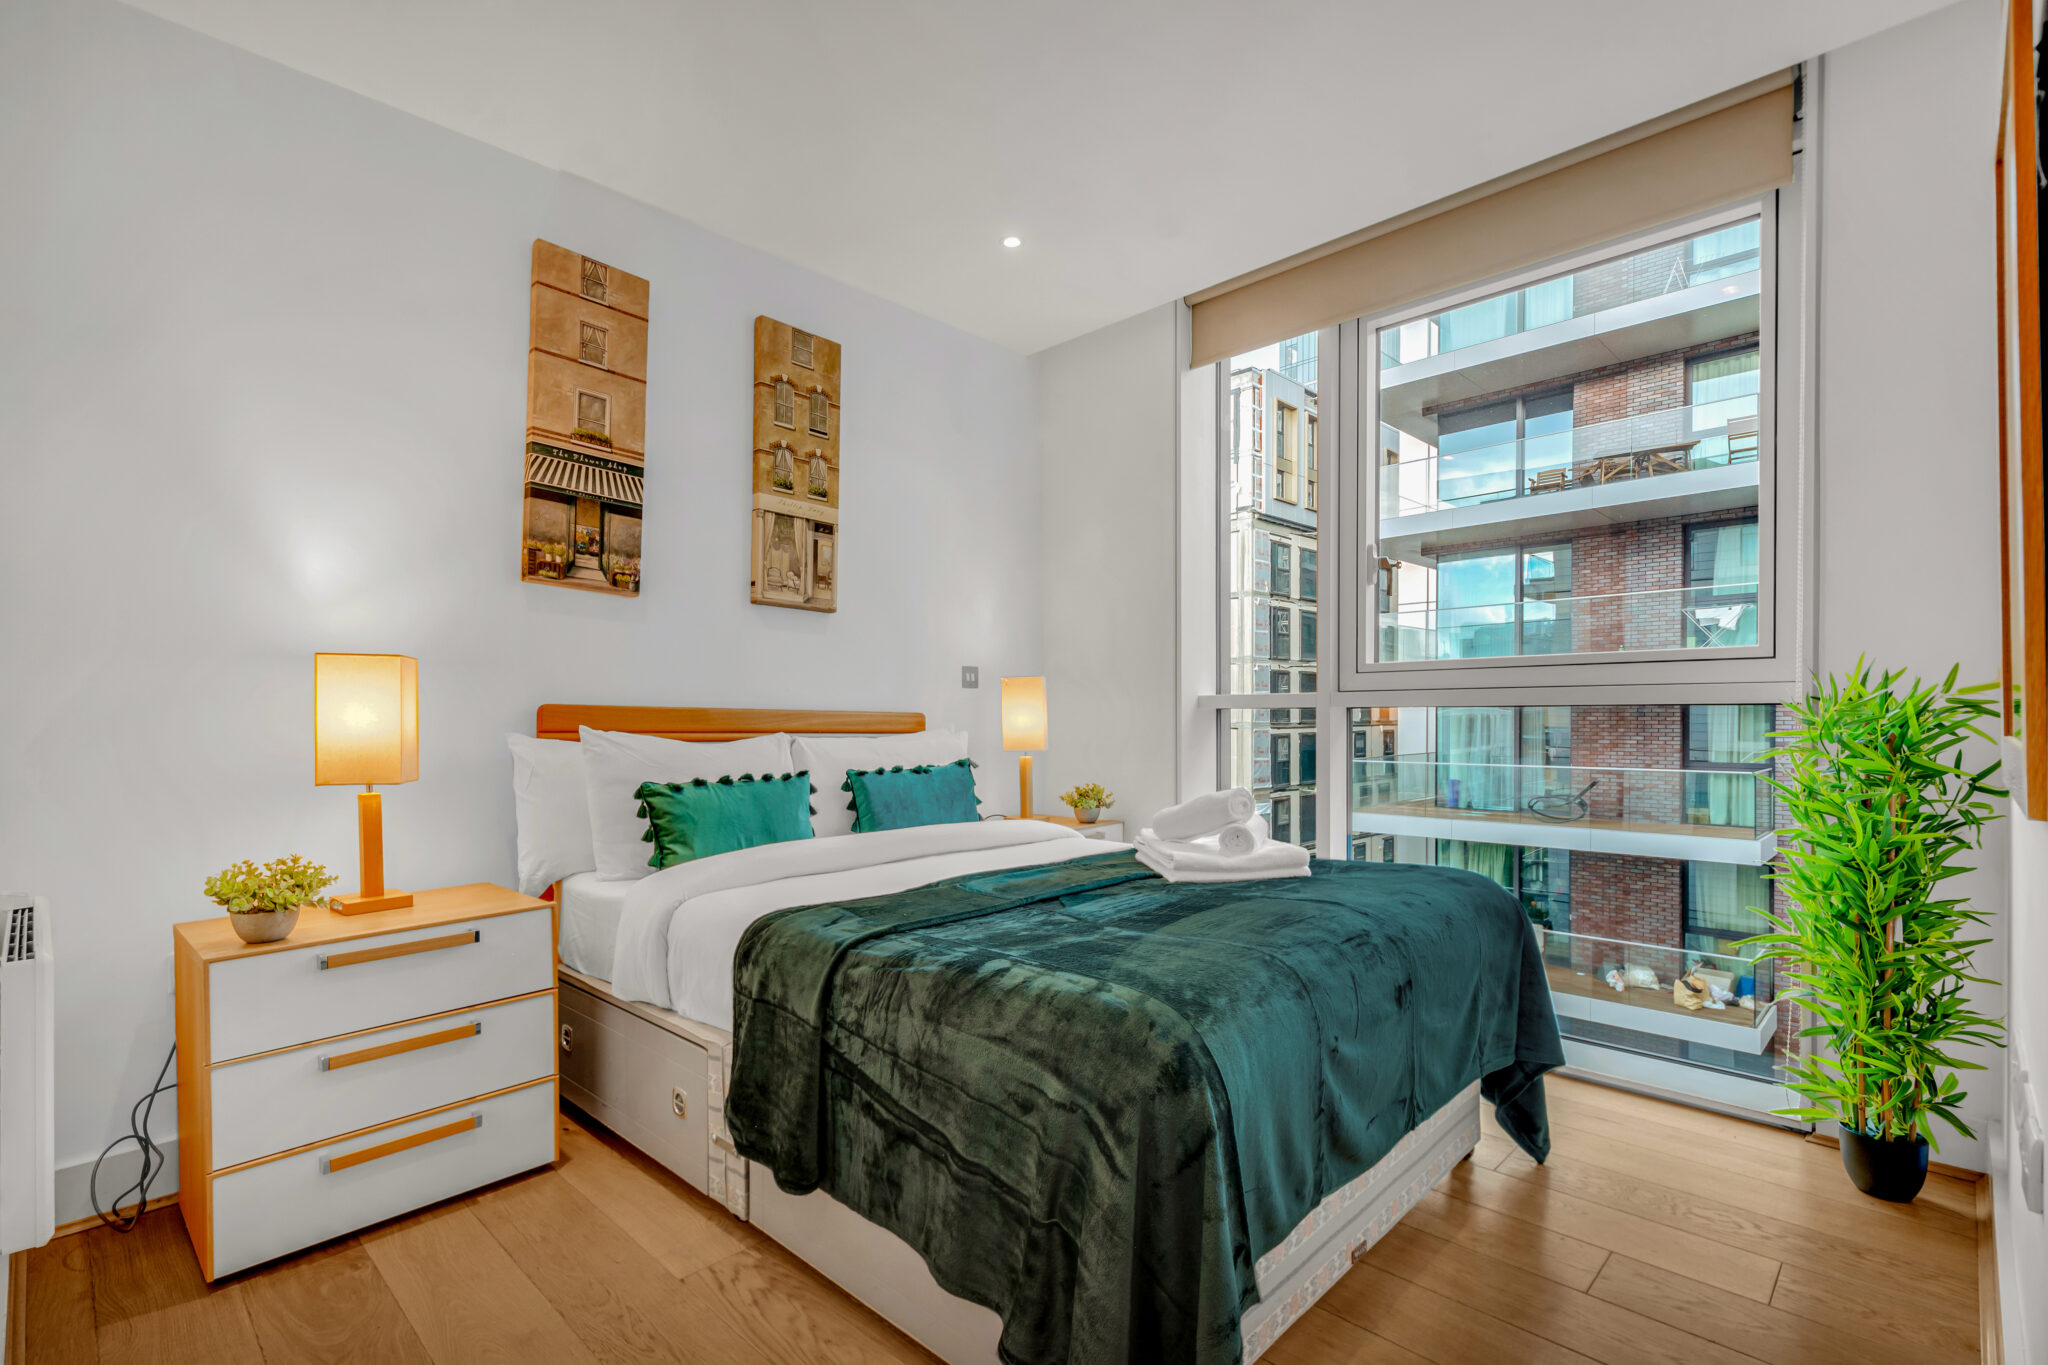 Book-modern-Serviced-Accommodation-Near-Aldgate-with-Lift-Access-and-Concierge.-Stay-Close-to-the-Tower-of-London-and-Liverpool-Street-Station-|-Urban-Stay